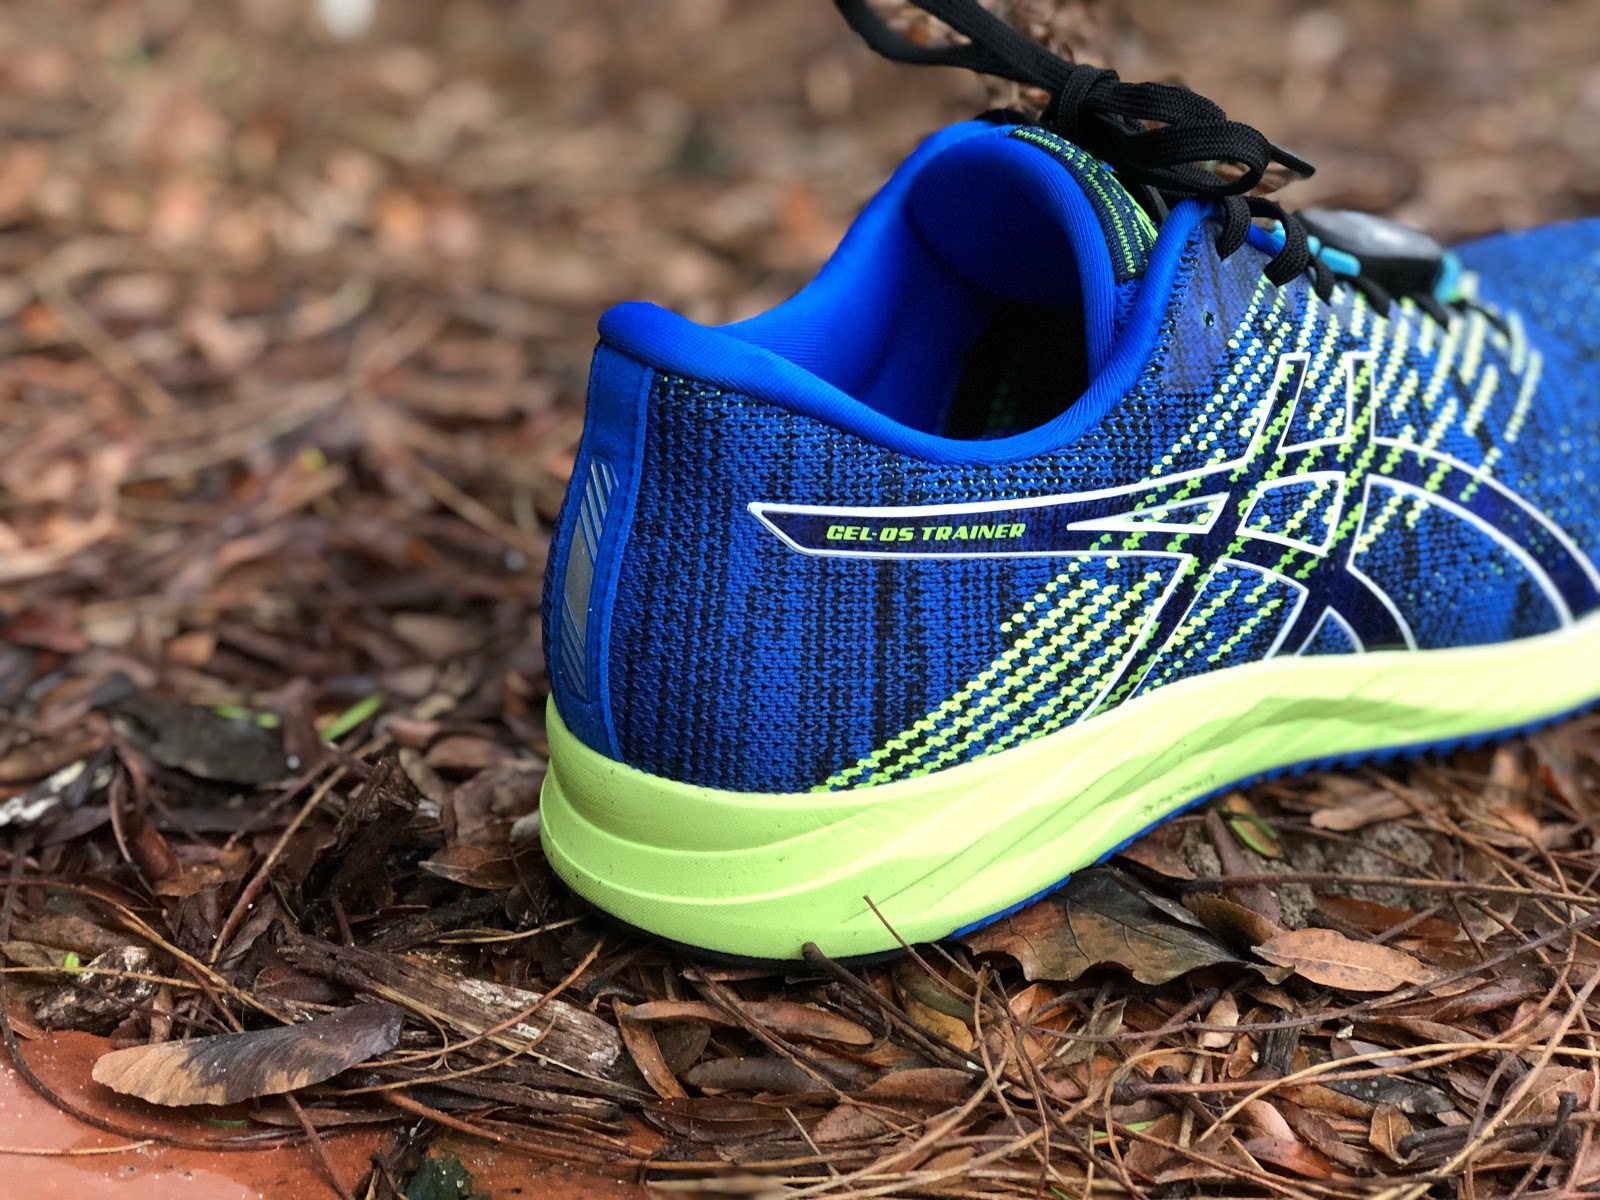 Road Trail Run: Gel-DS Trainer 24: Like An Old Sweater (That Doesn't Quite Fit)